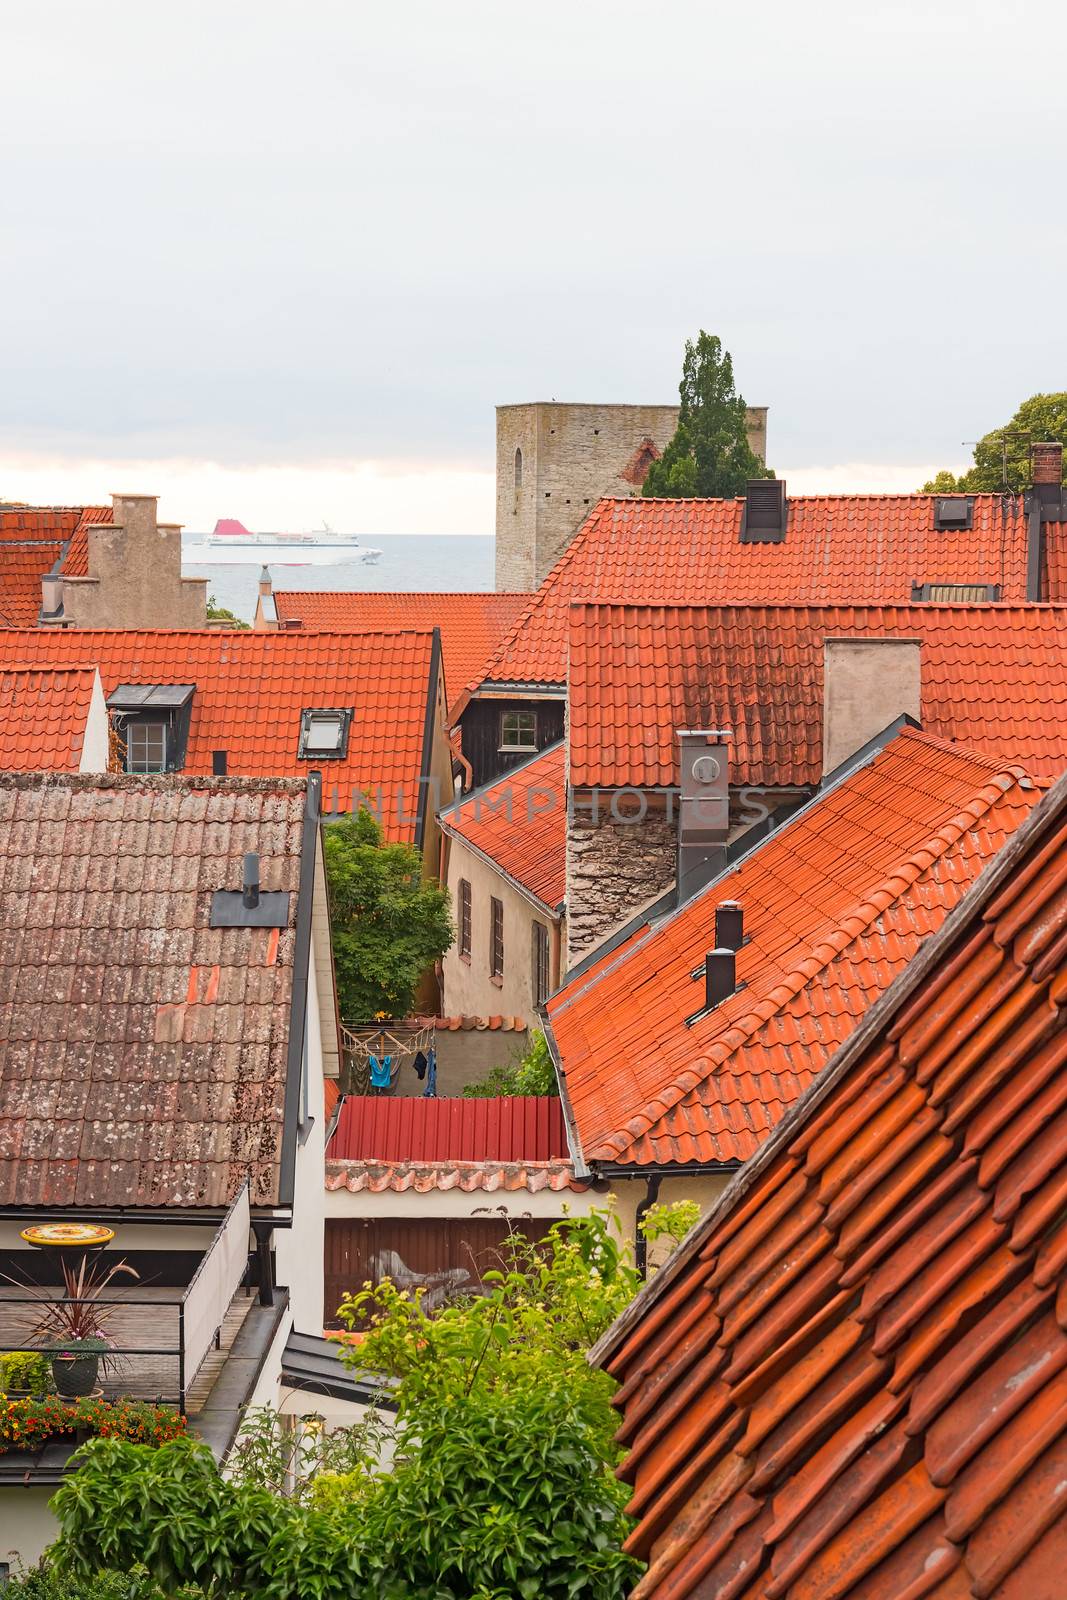 View over Swedish town Visby, with Baltic Sea behind the houses. Visby is the capital of Gotland.